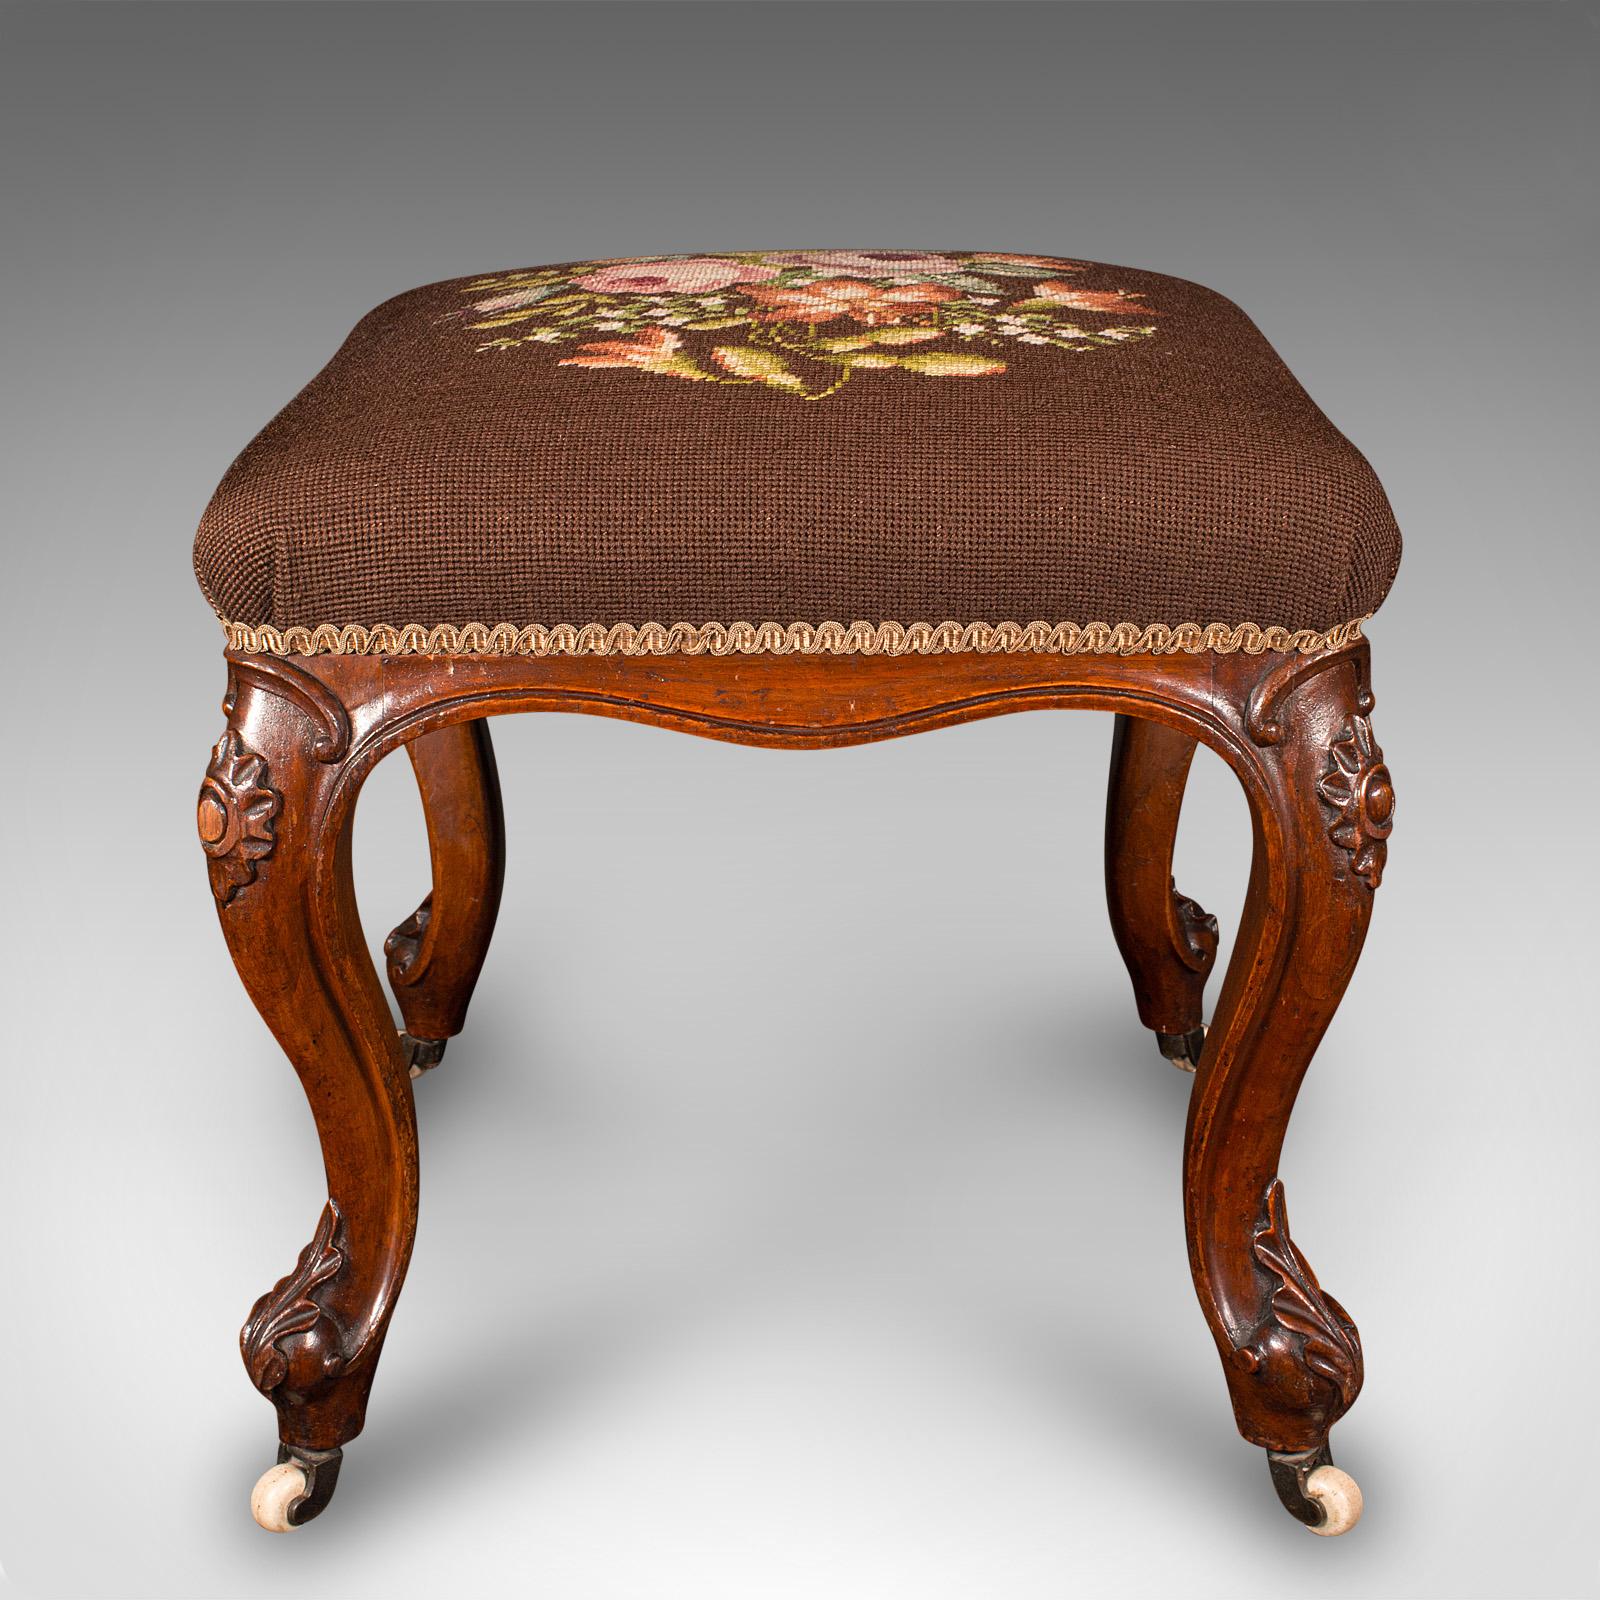 British Antique Dressing Stool, English, Walnut, Needlepoint, Footstool, Early Victorian For Sale